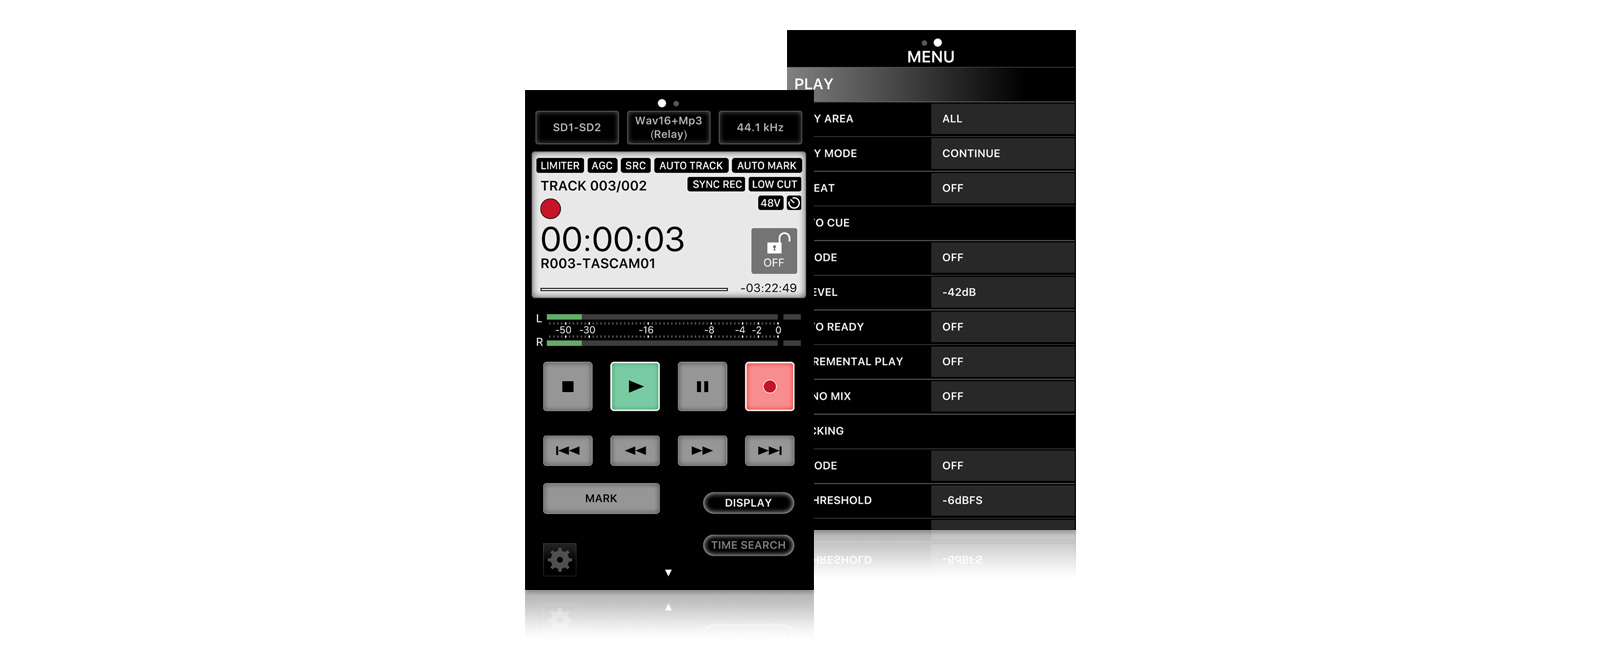 TASCAM SS250 CONTROL - New Upgraded Version 2.0.1 (Android version) of Software Released